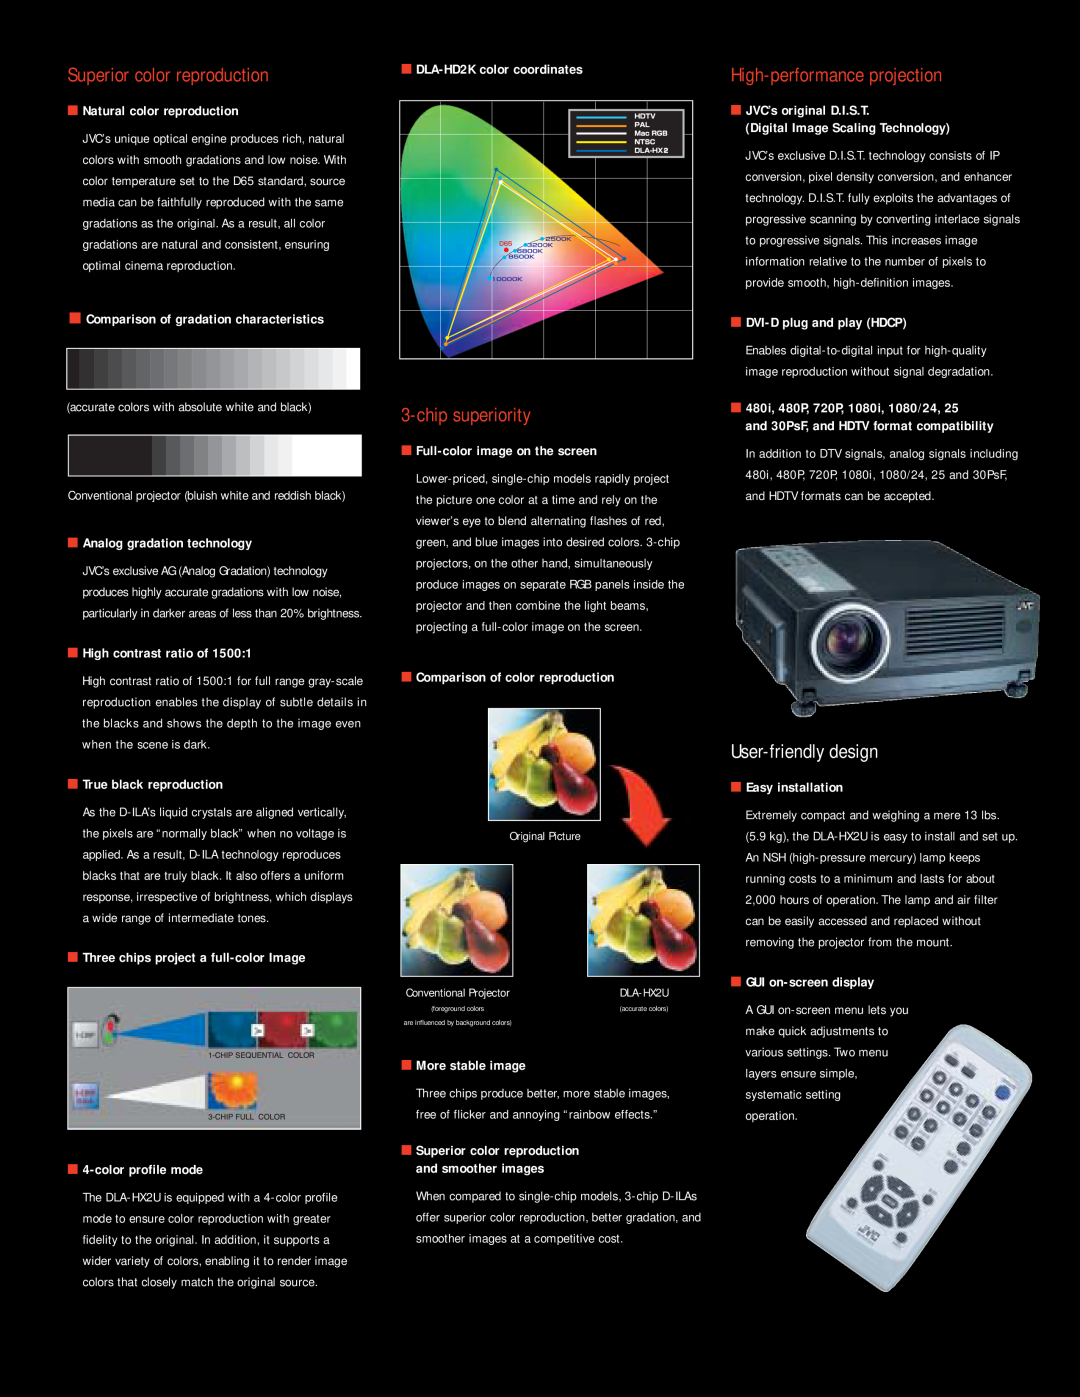 JVC DLA-HX2U3 manual Superior color reproduction, chip superiority, High-performance projection, User-friendly design 